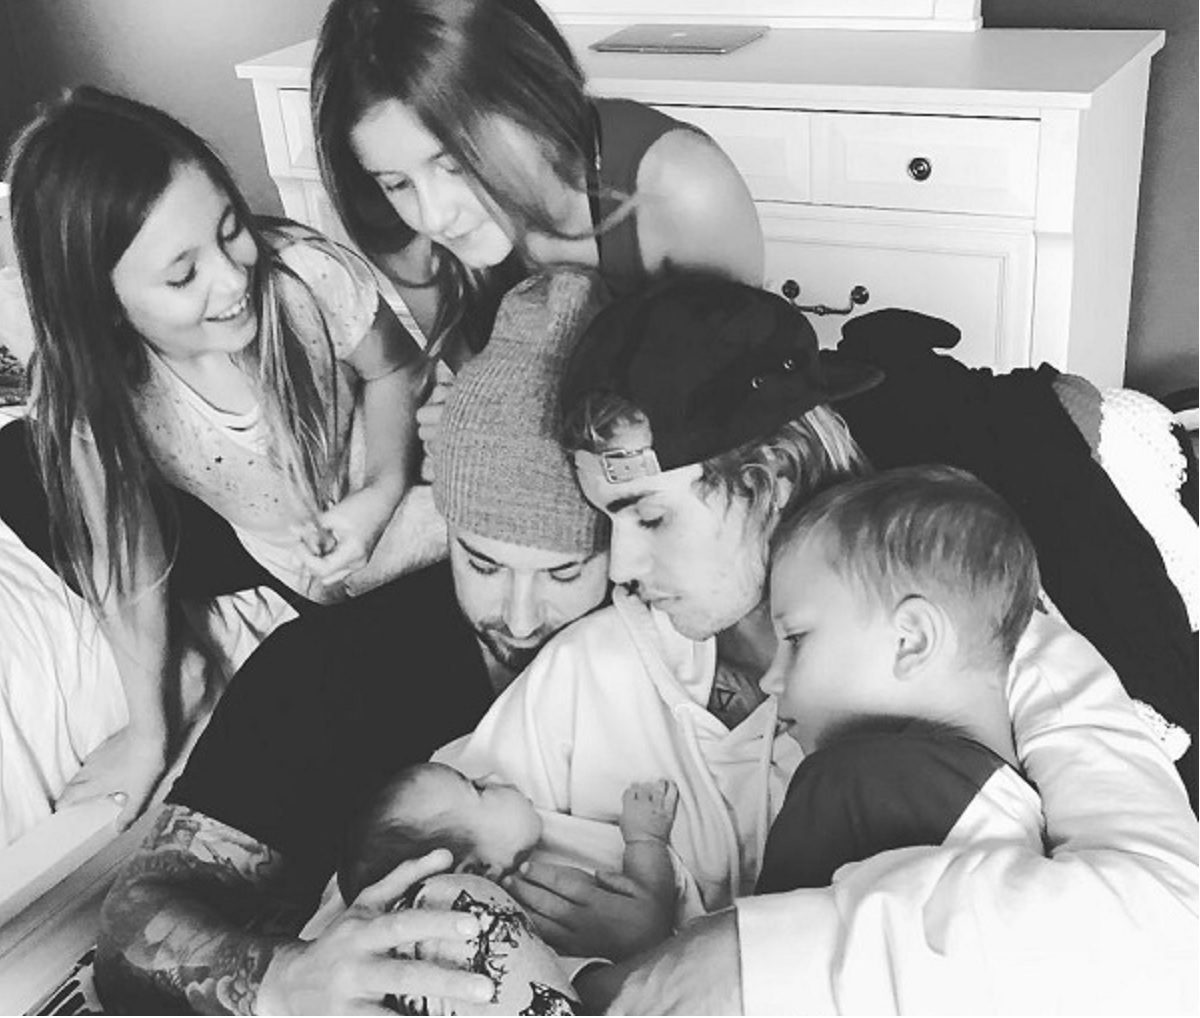 Justin Bieber Siblings Are All Very Close to Him